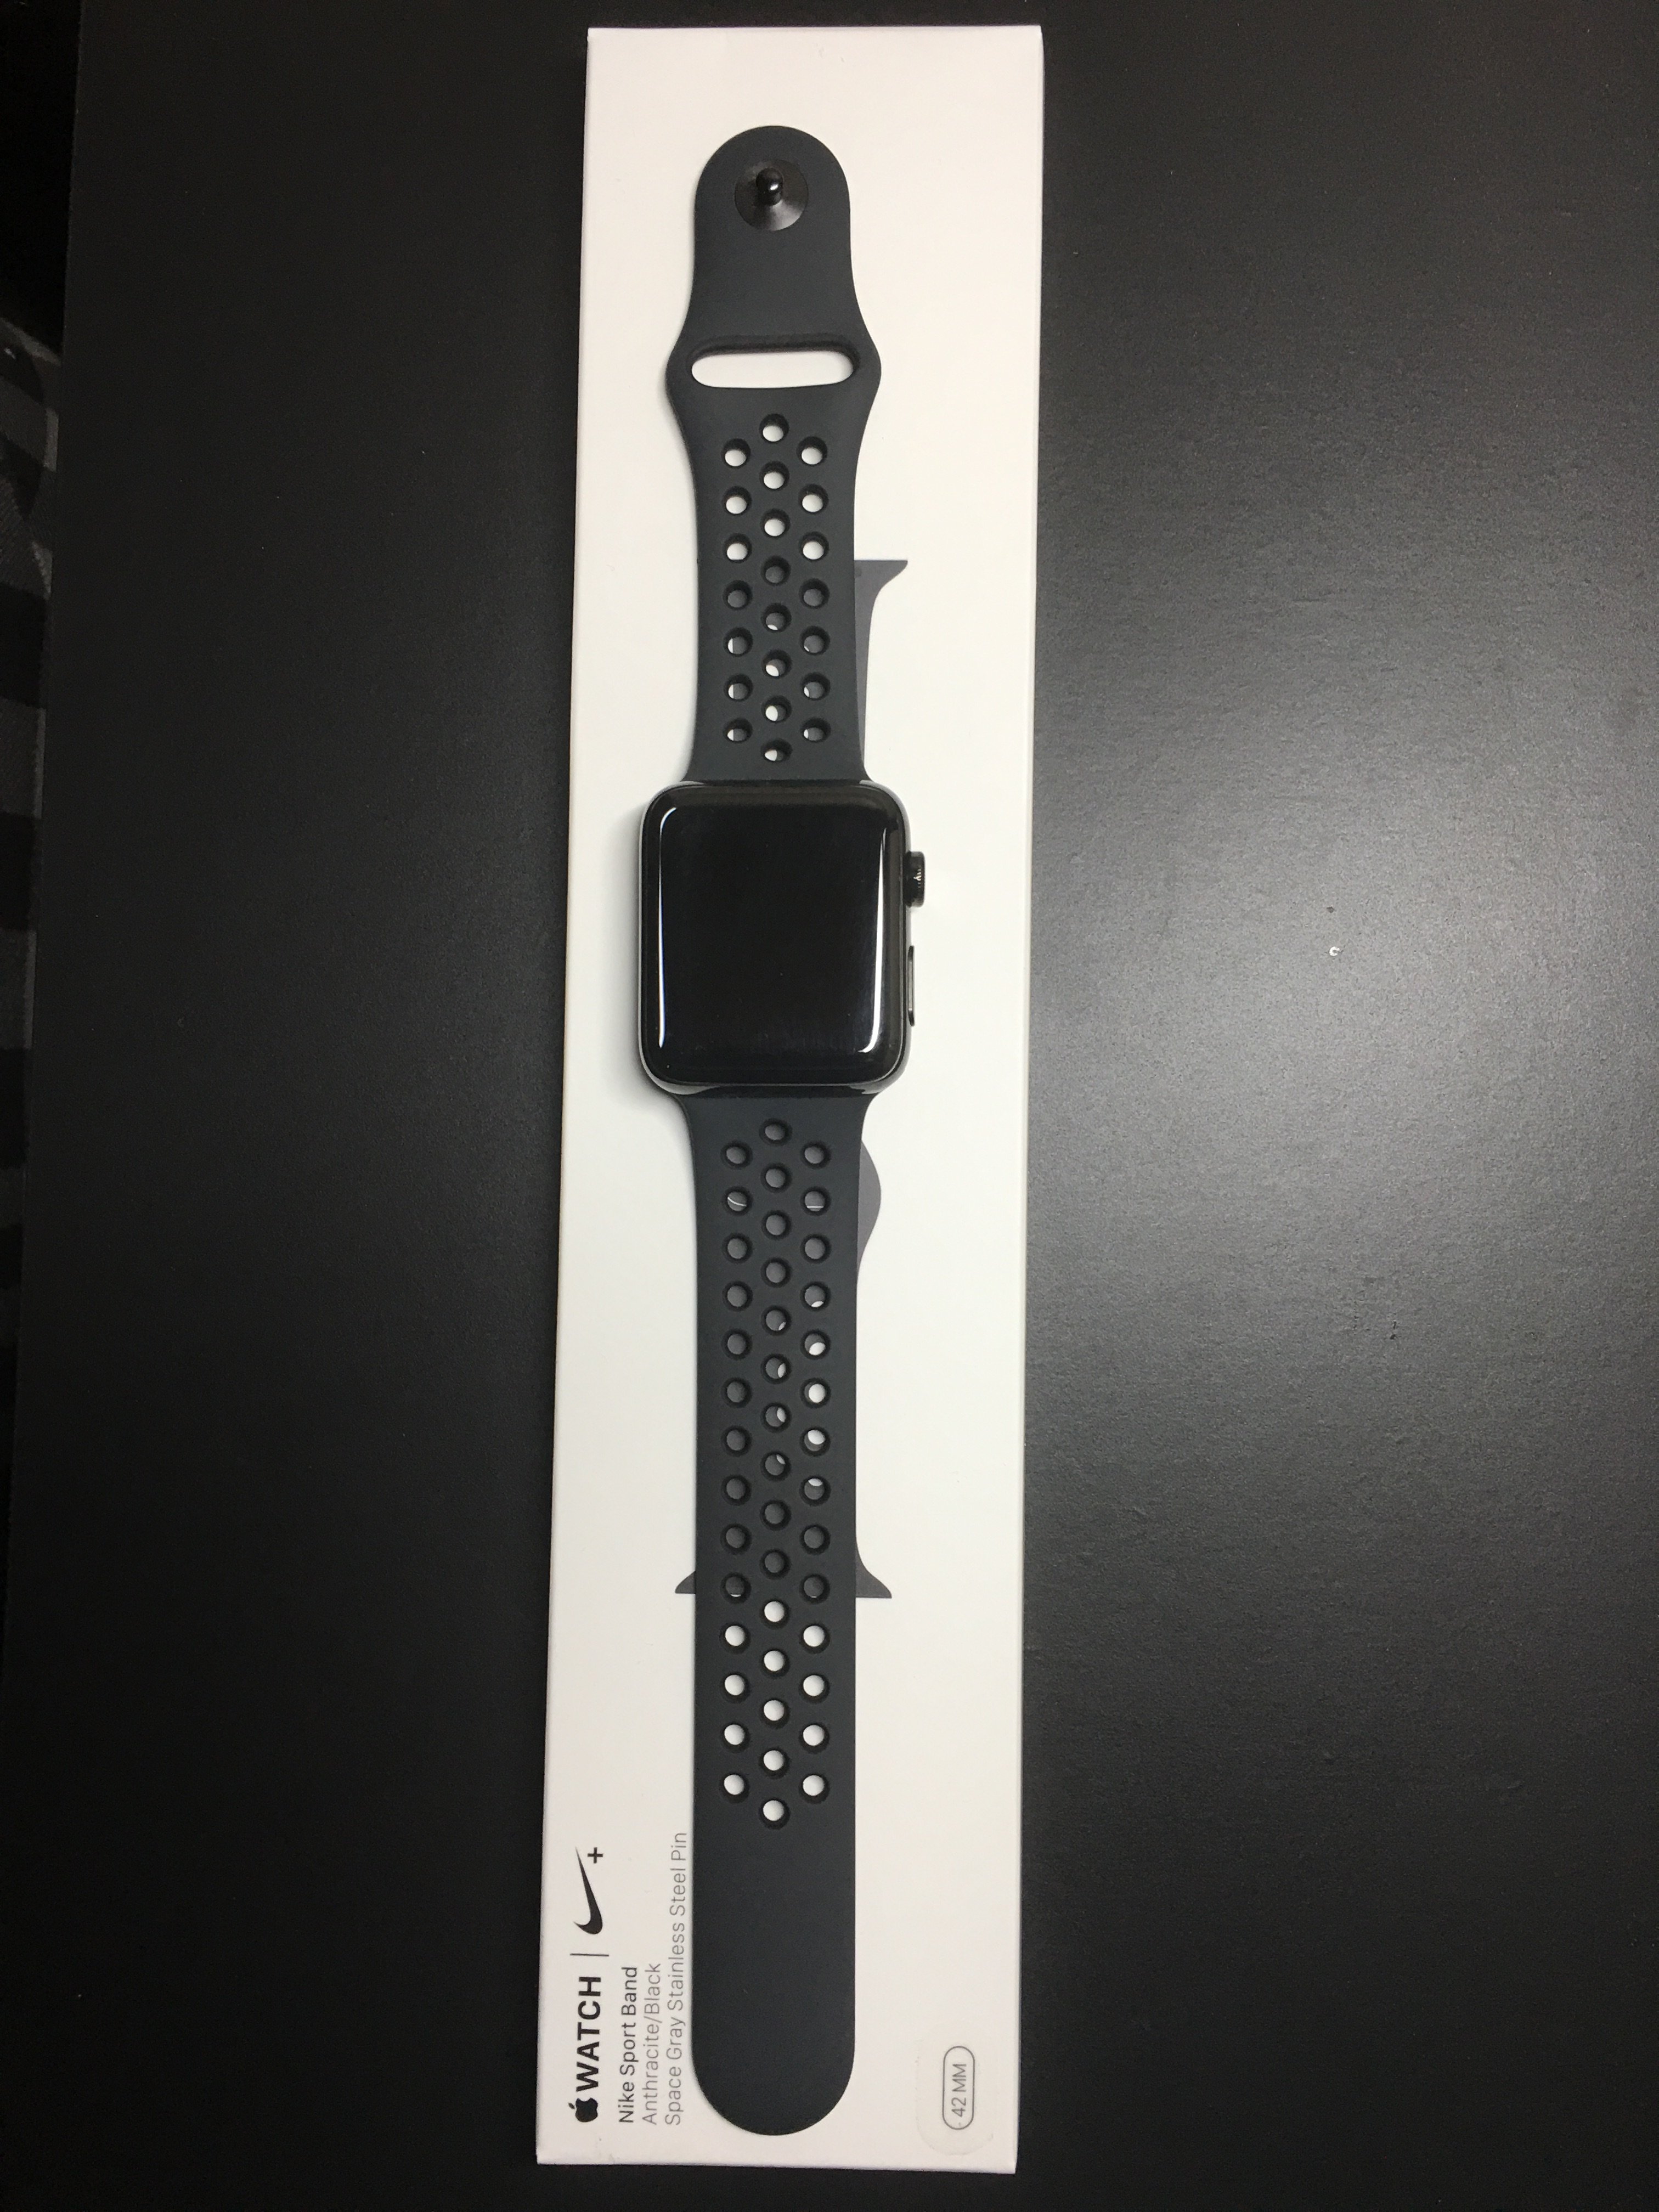 Apple Watch Nike bands! | Page 3 | MacRumors Forums